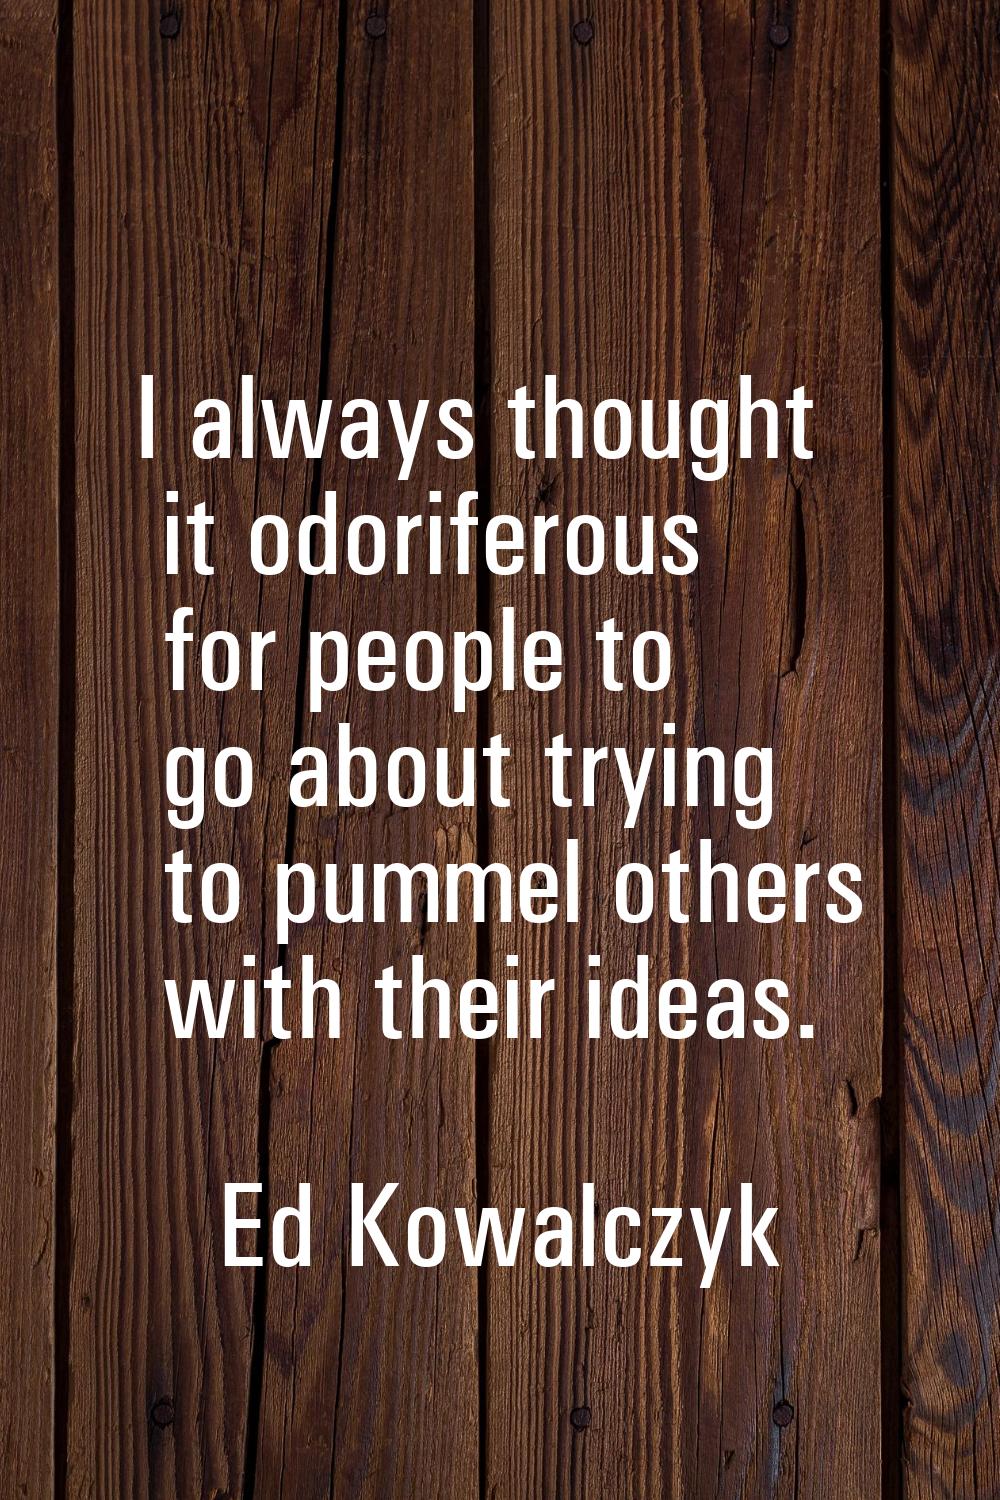 I always thought it odoriferous for people to go about trying to pummel others with their ideas.